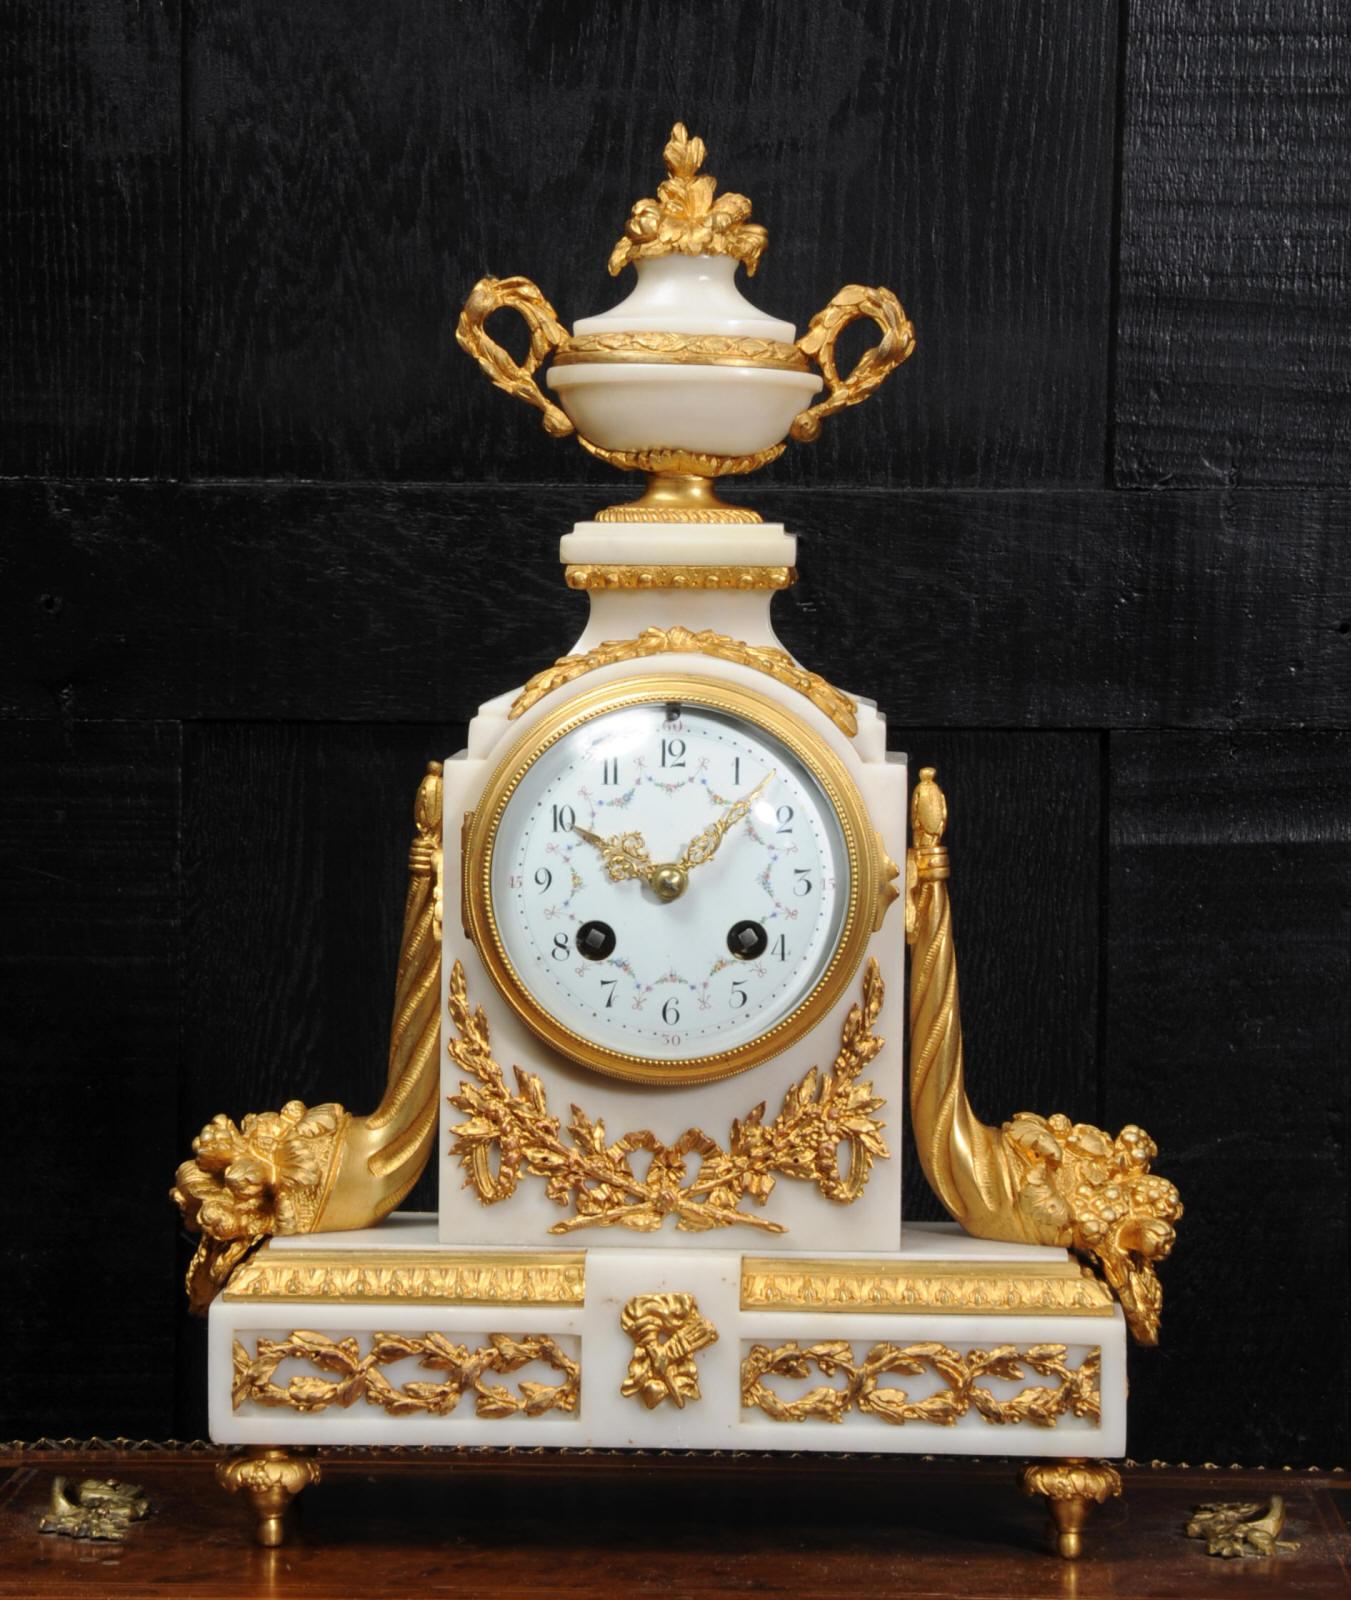 A beautiful antique French classical white marble boudoir clock by the famous maker Samuel Marti. The silky white marble is mounted with crisply modelled and finely gilded bronze. To the sides are cornucopia, an urn to the top and fretted laurel